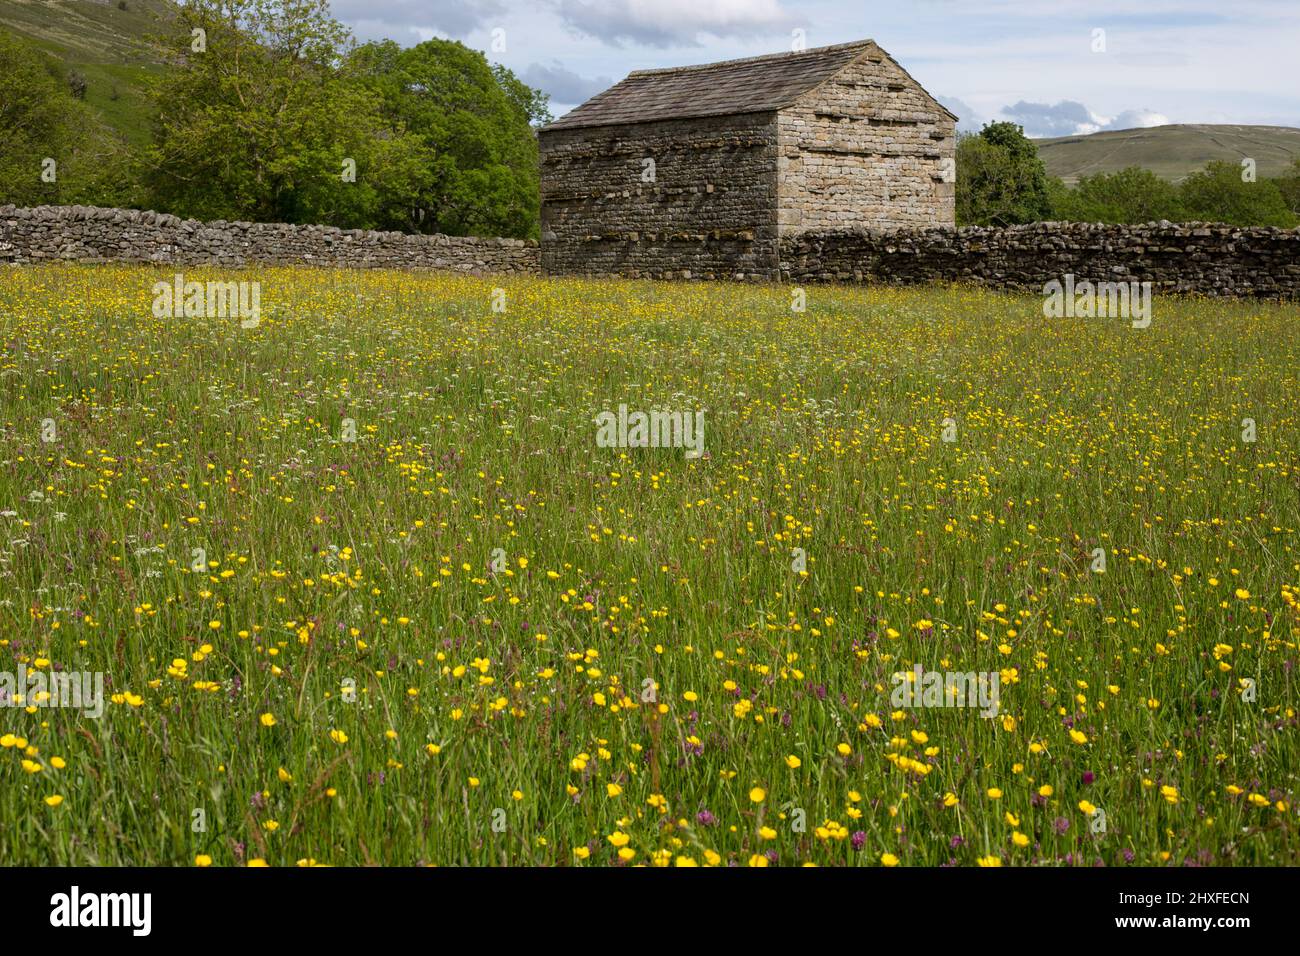 Traditional flower and hay meadows and field barn at Muker in the Yorkshire Dales National Park, Swaledale, North Yorkshire, England Stock Photo